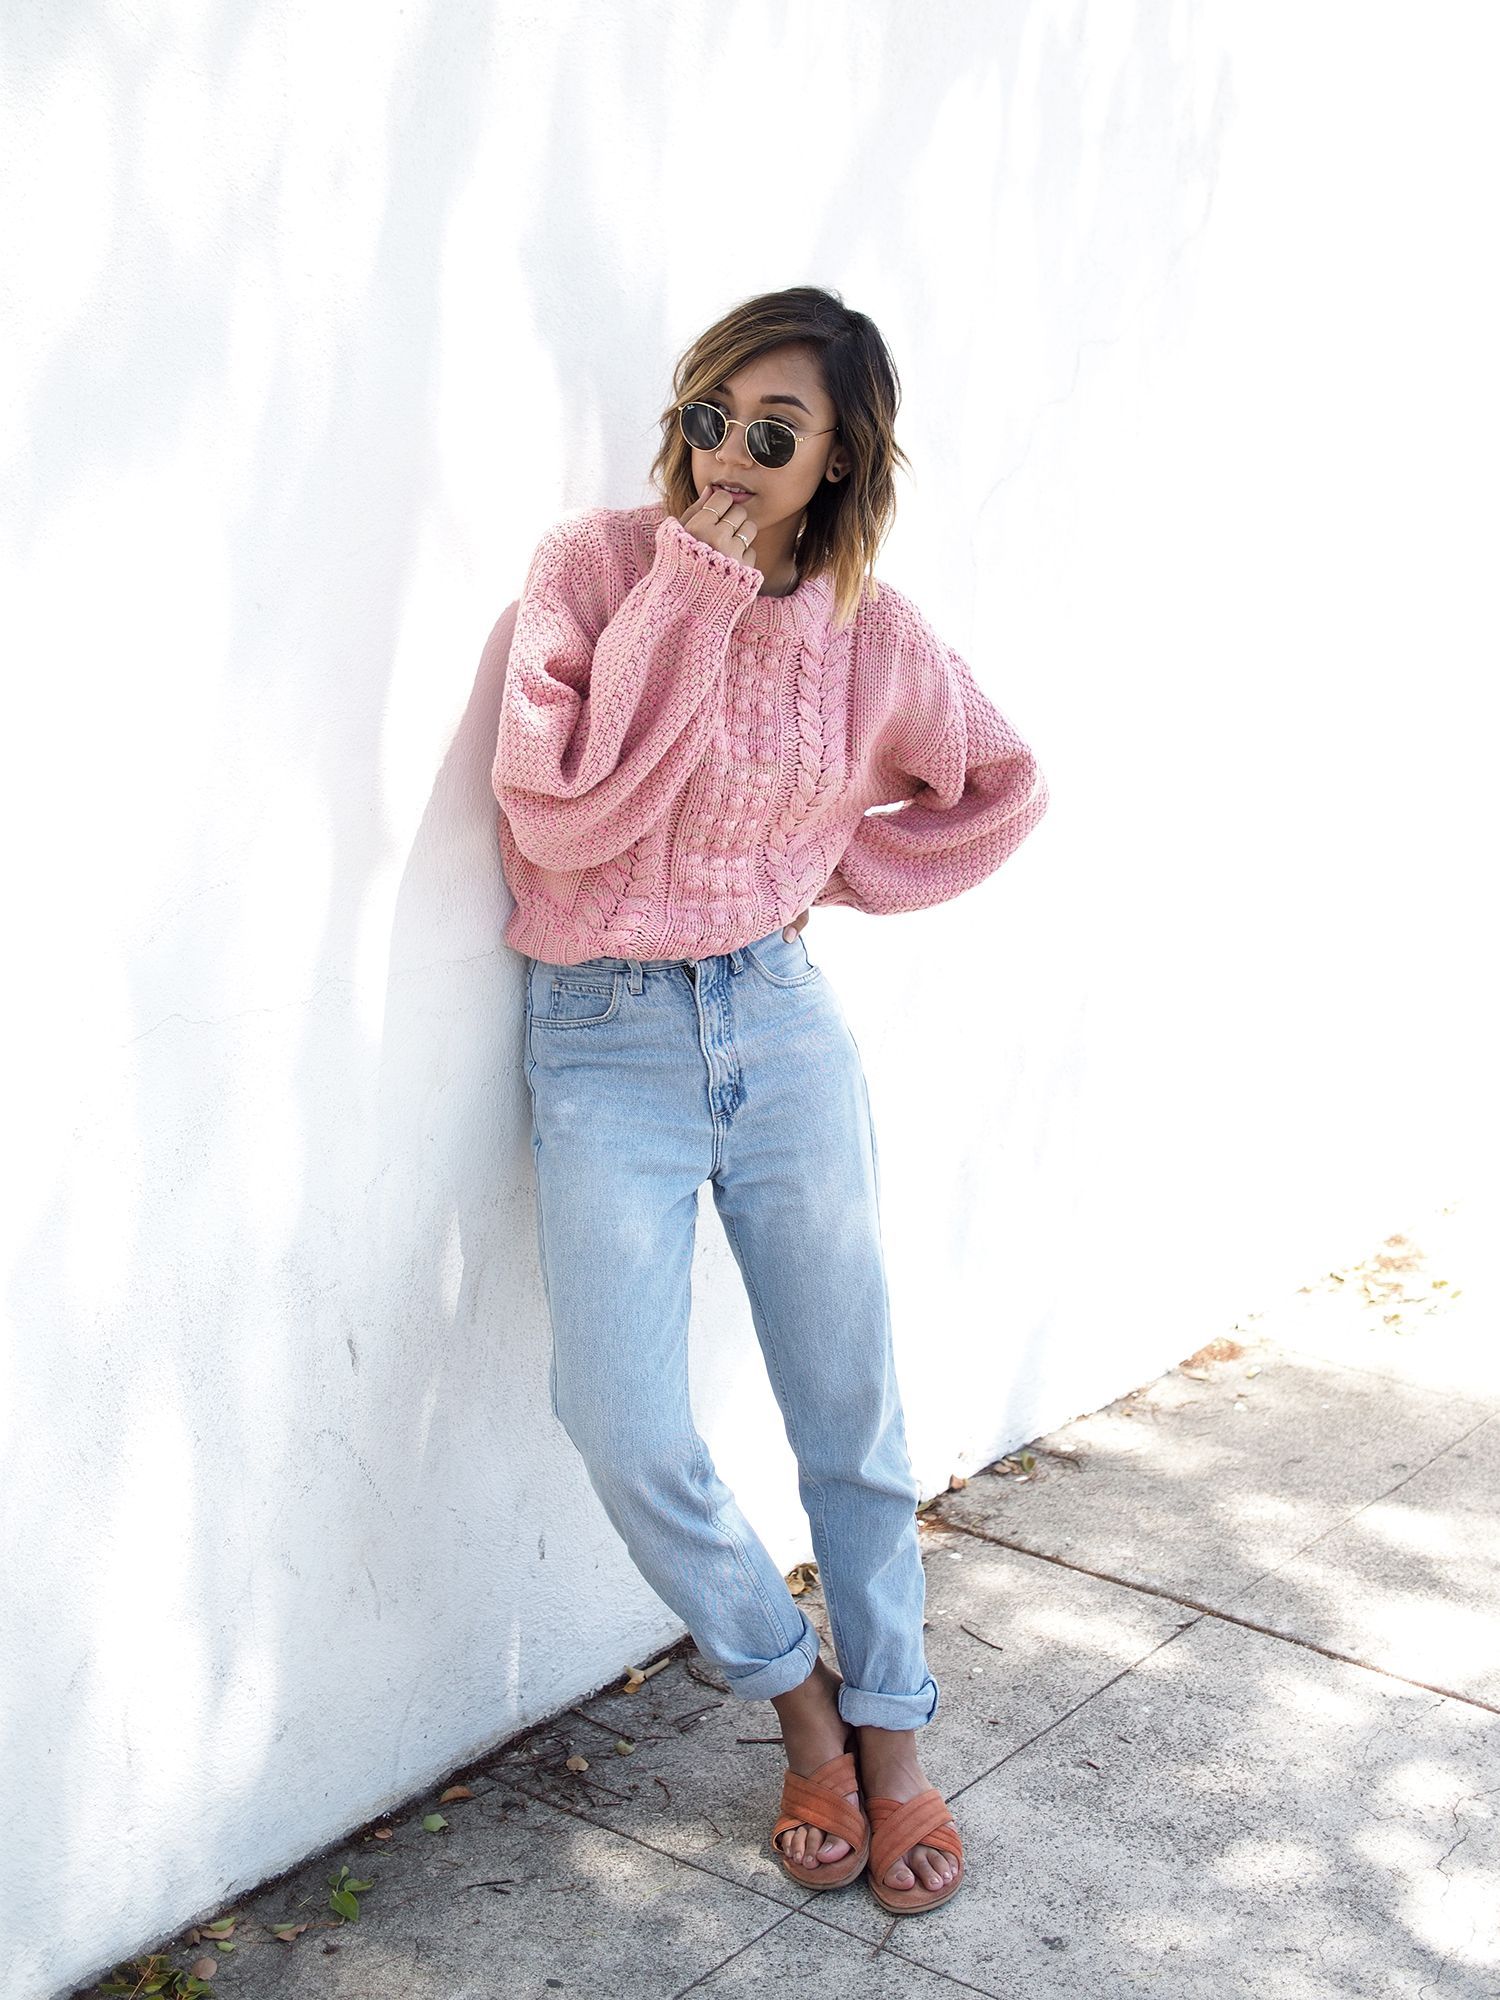 CHUNKY PINK KNIT – Unconscious Style @shhtephs  Chunky Pink Knit Sweater – H&M | Mom Jeans – Thrifted (Guess) | Sadie Suede